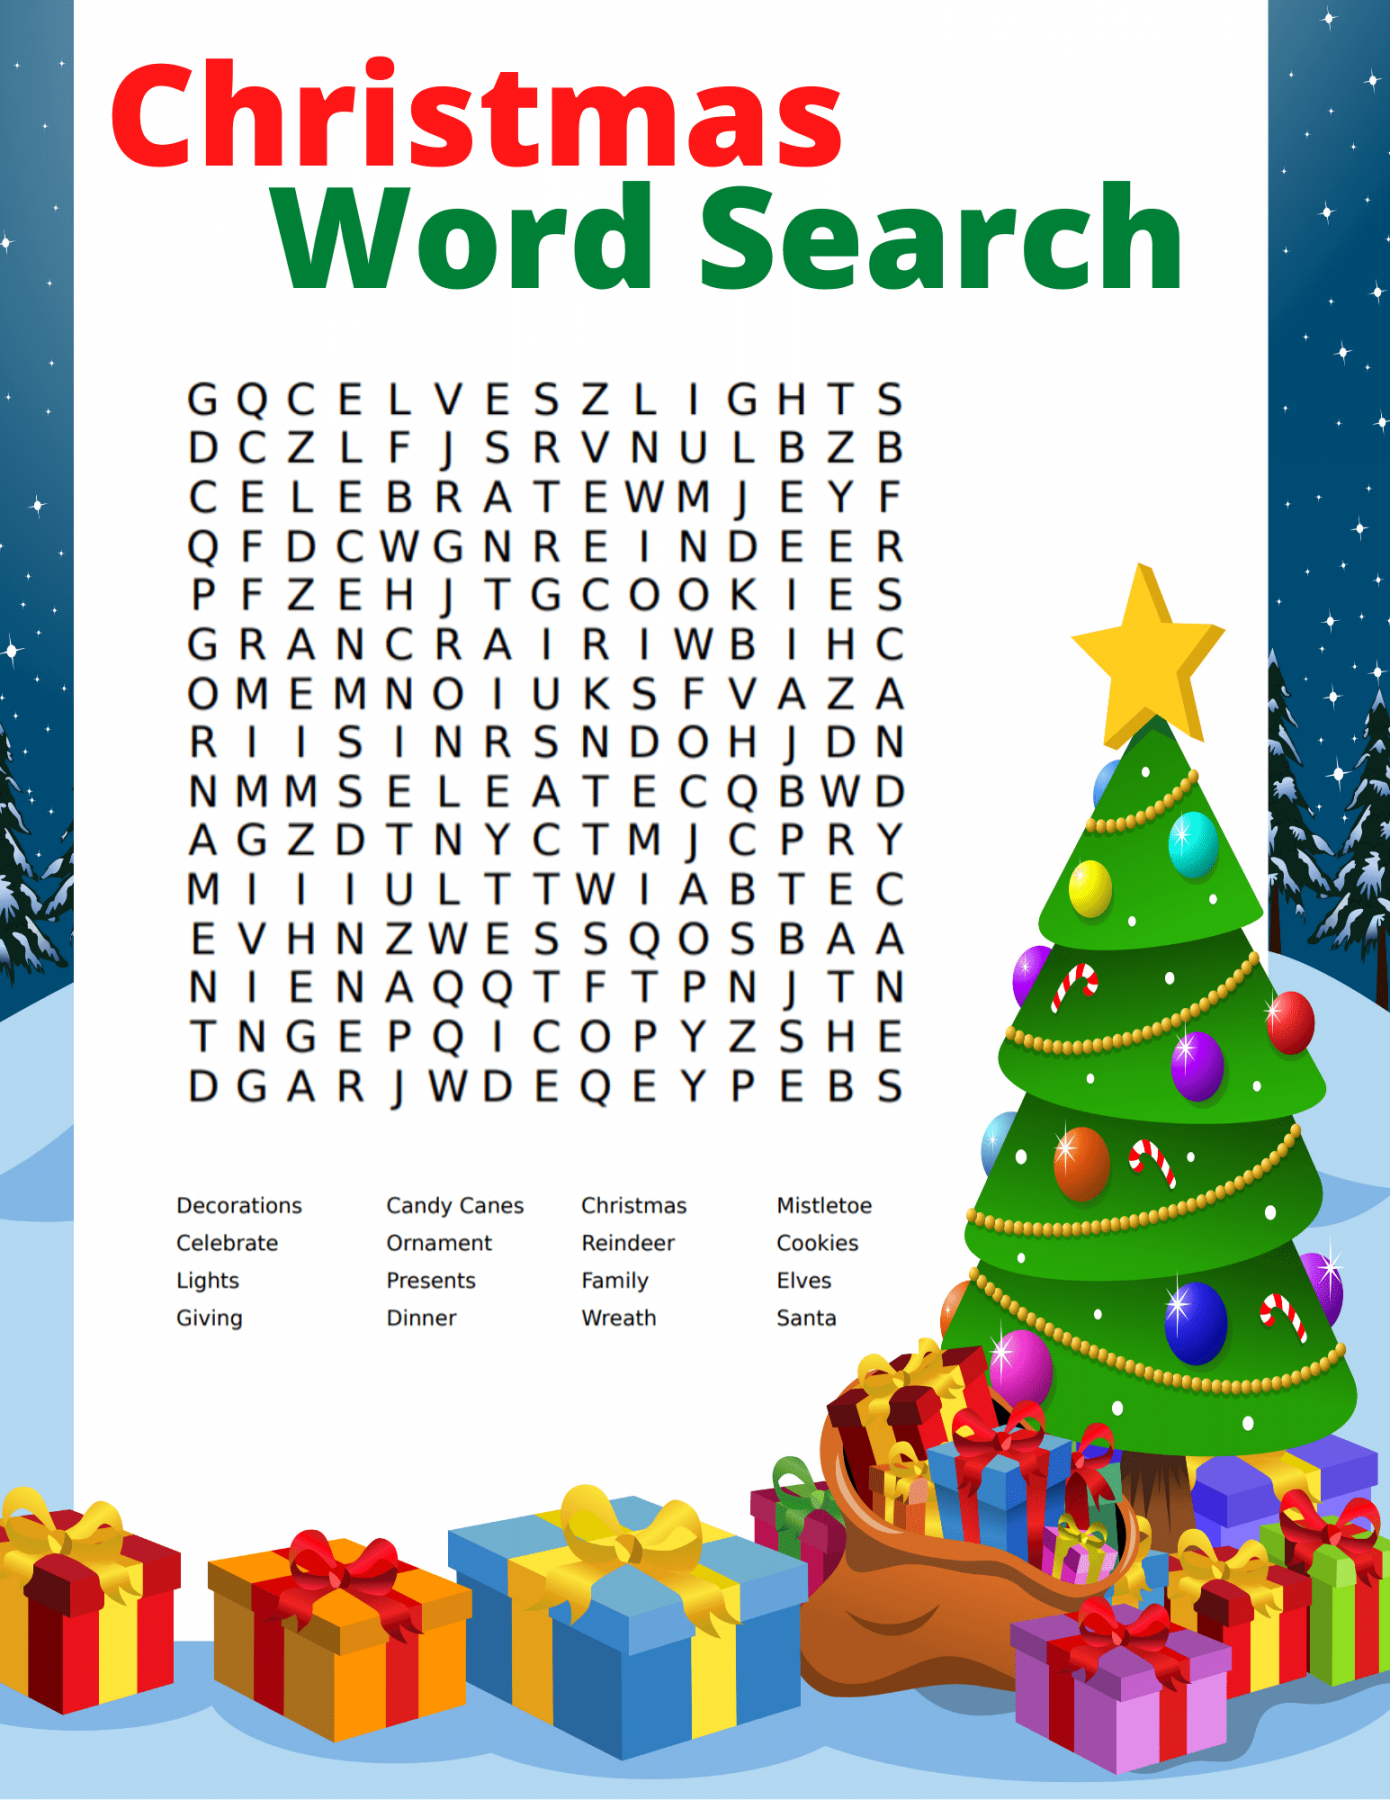 Free Christmas Word Search Printable for Kids and Adults - FREE Printables - Free Printable Christmas Word Search